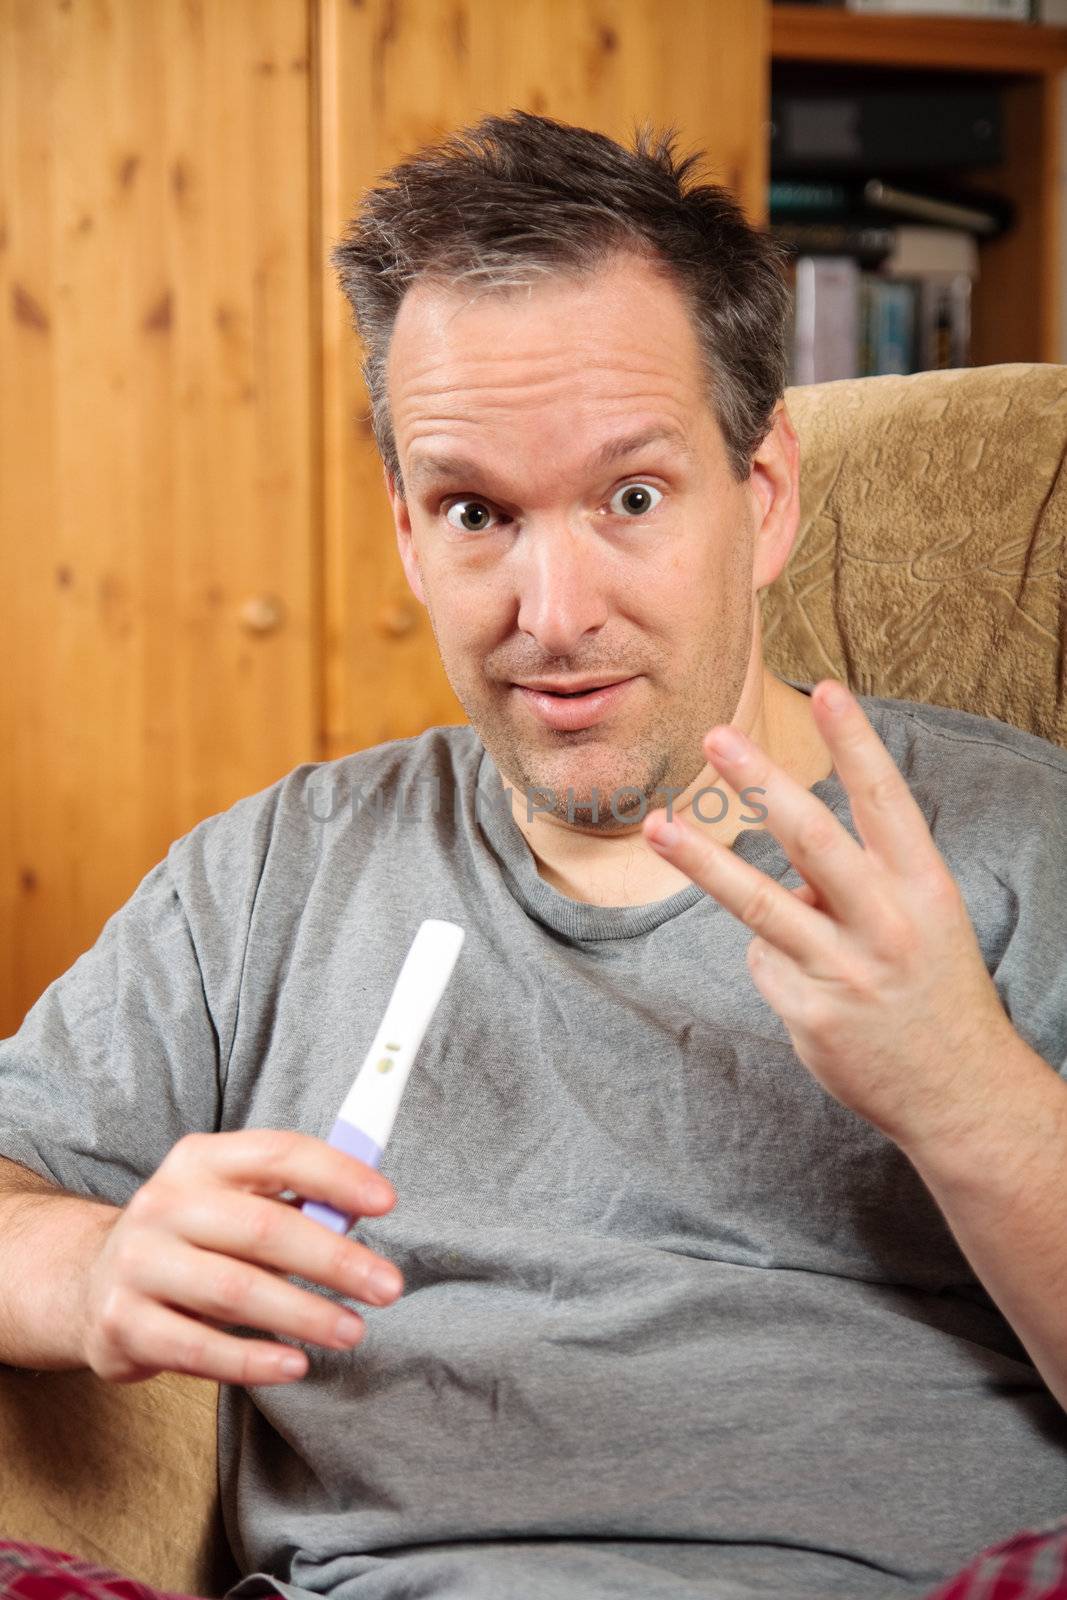 Surprised man holding a positive pregnancy test and showing 3 fingers